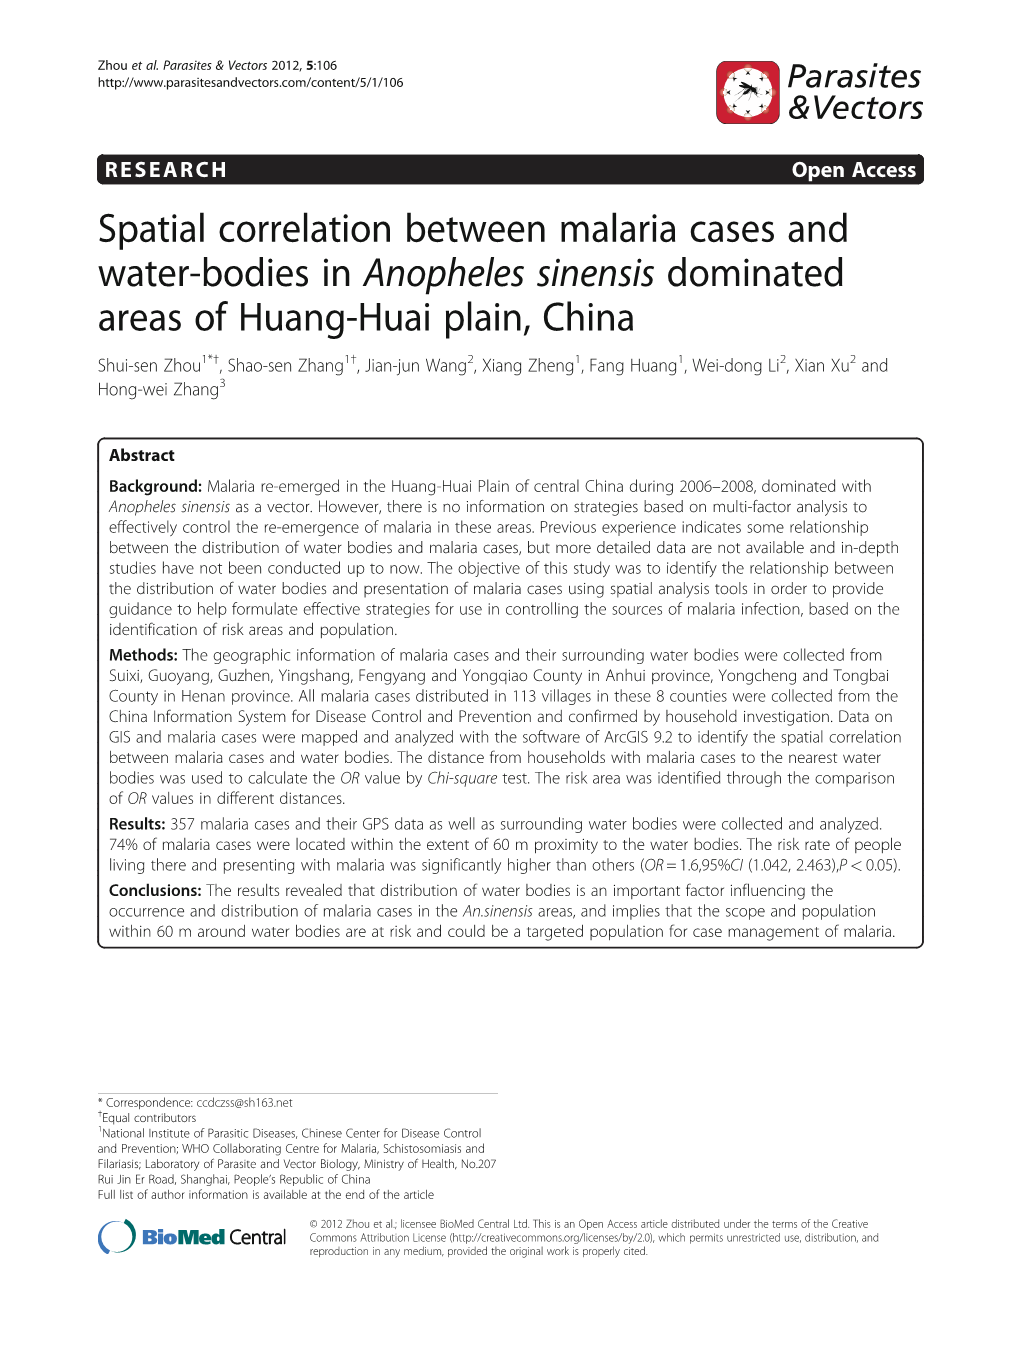 Spatial Correlation Between Malaria Cases and Water-Bodies In